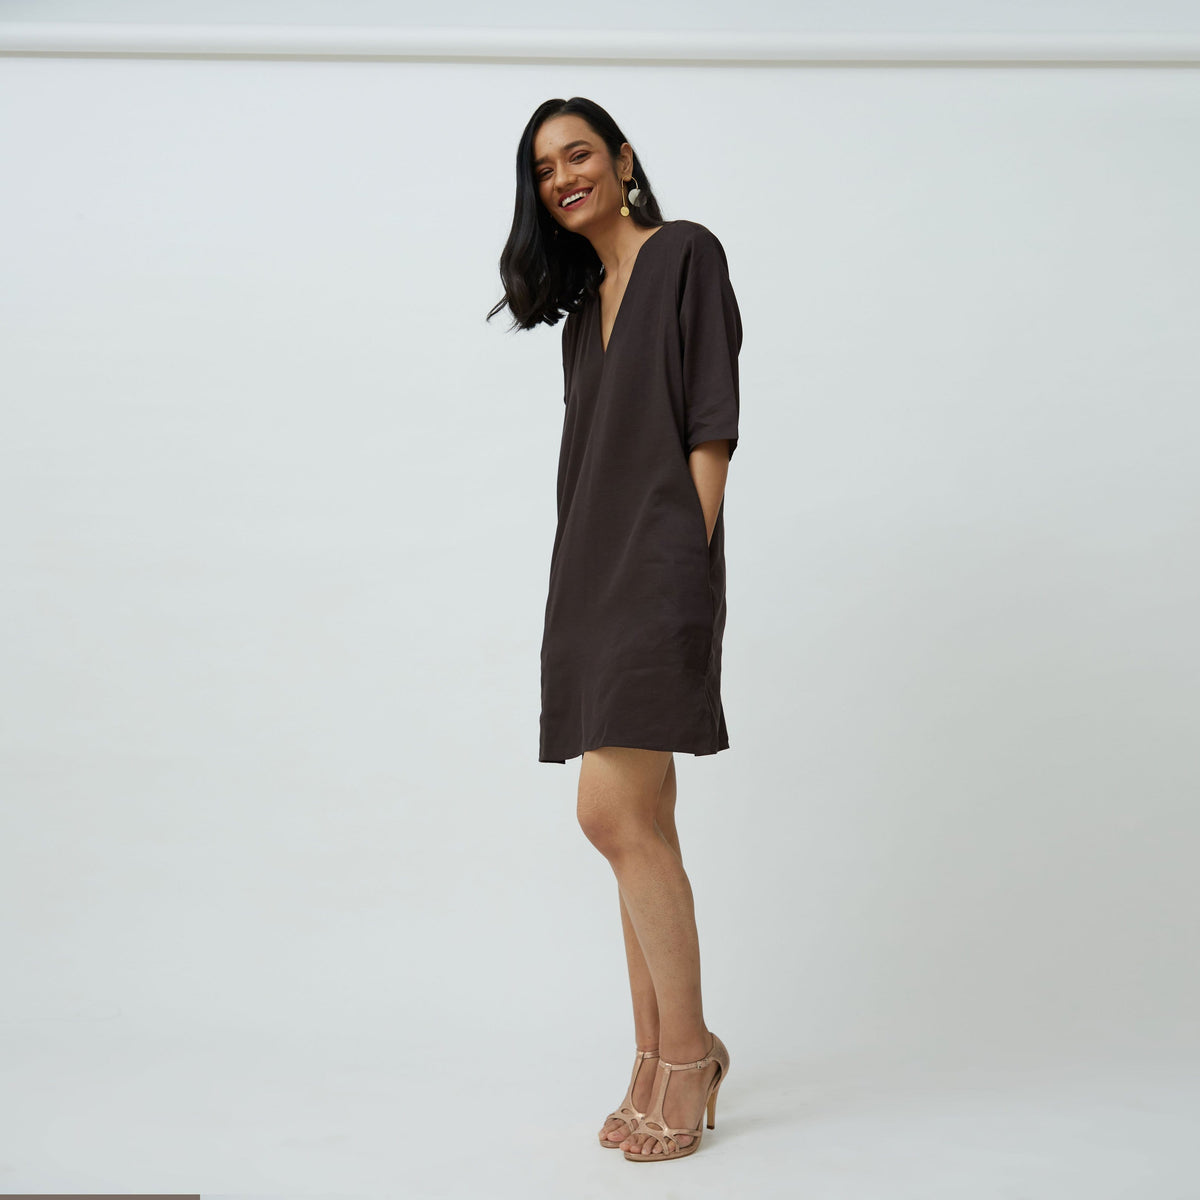 Saltpetre womens wear, indo-western knee length dress for semi formal, casual, occassional wear. Comfortably elegant dress in Coffee brown colour with three quarter sleeves, side slits and side pockets.